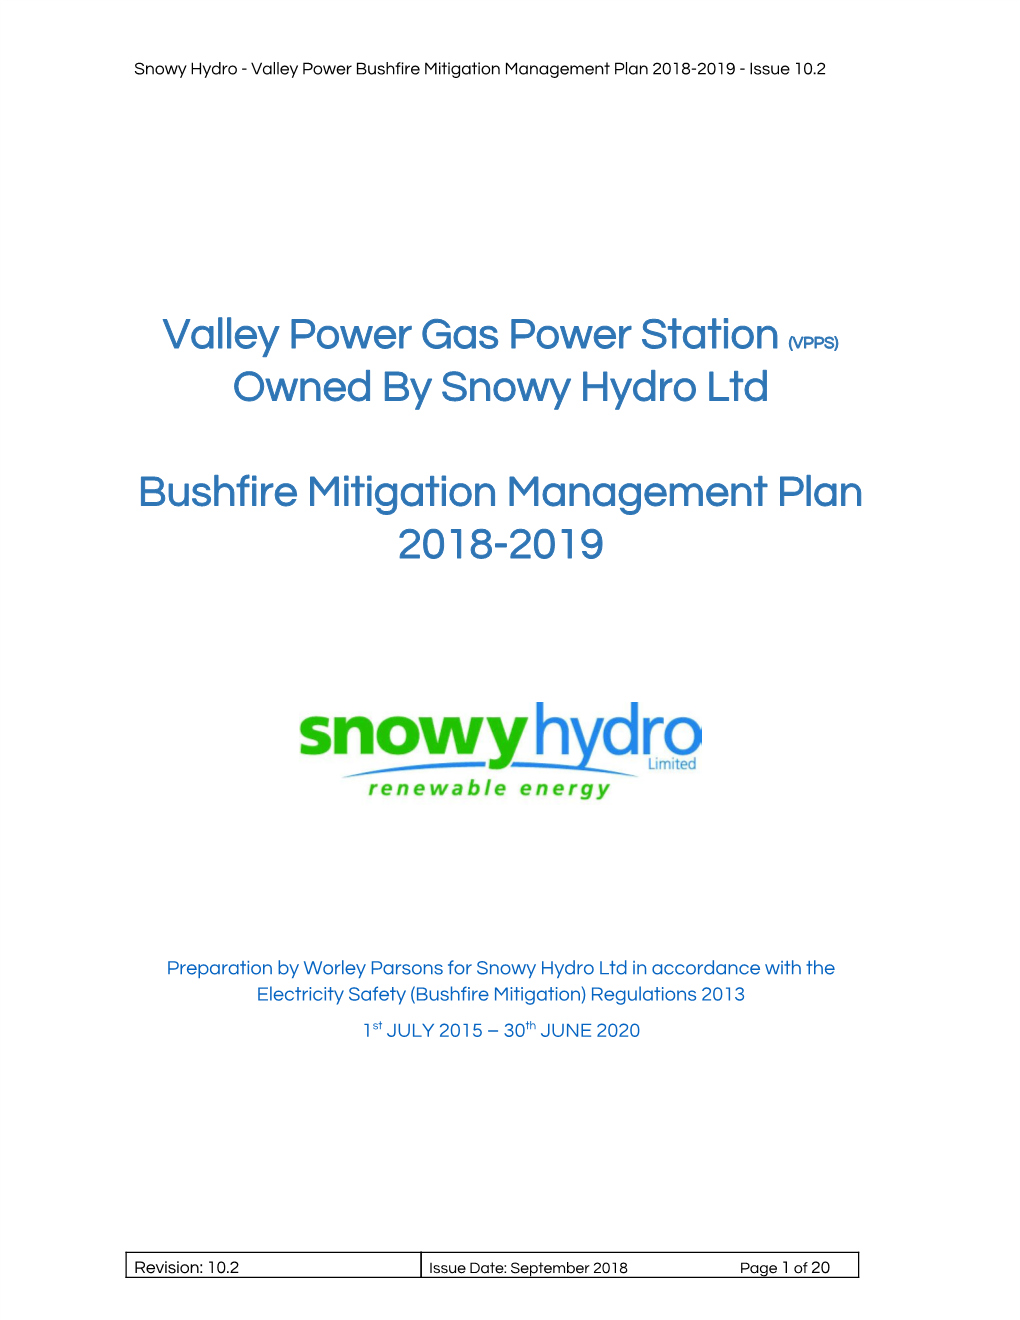 Valley Power Gas Power Station ​(VPPS) Owned by Snowy Hydro